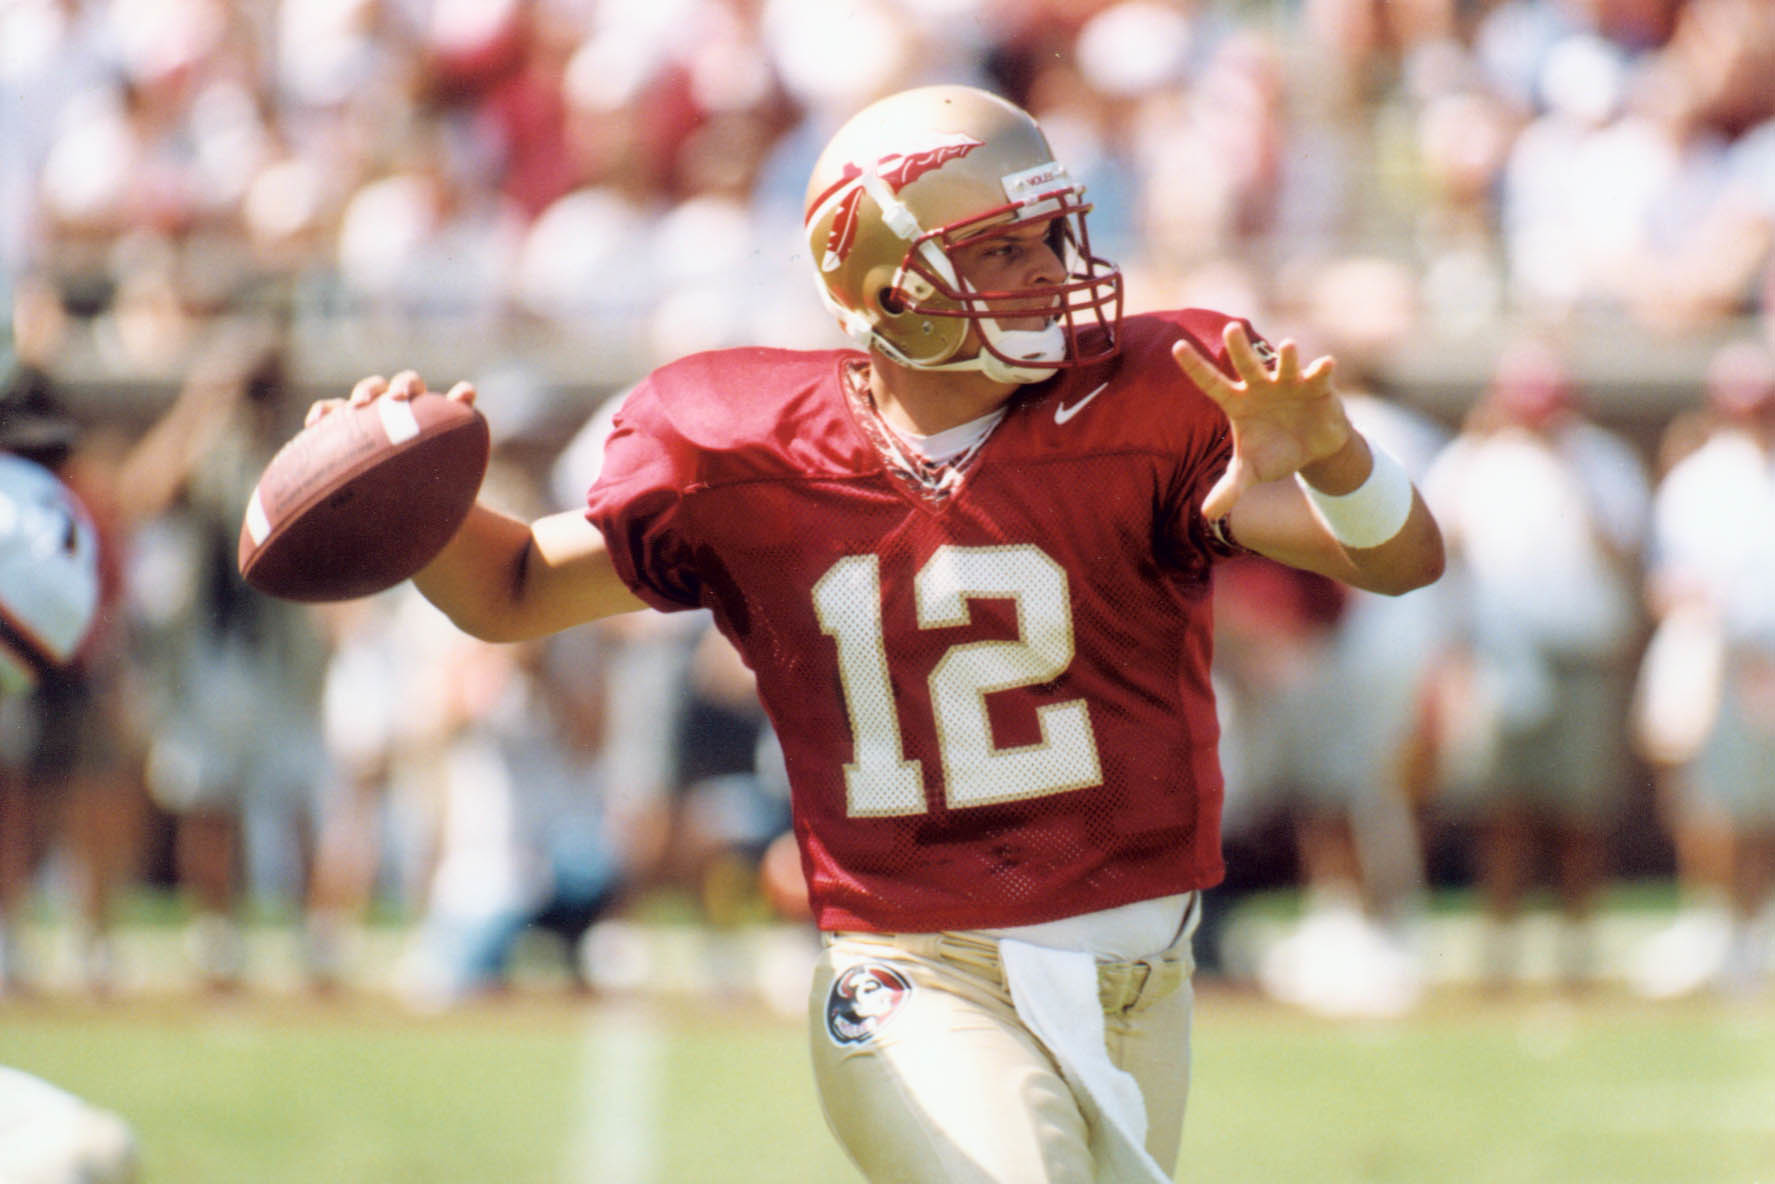 Former FSU quarterback Thad Busby drops back to pass during a game. Photo courtesy of FSU Sports Info